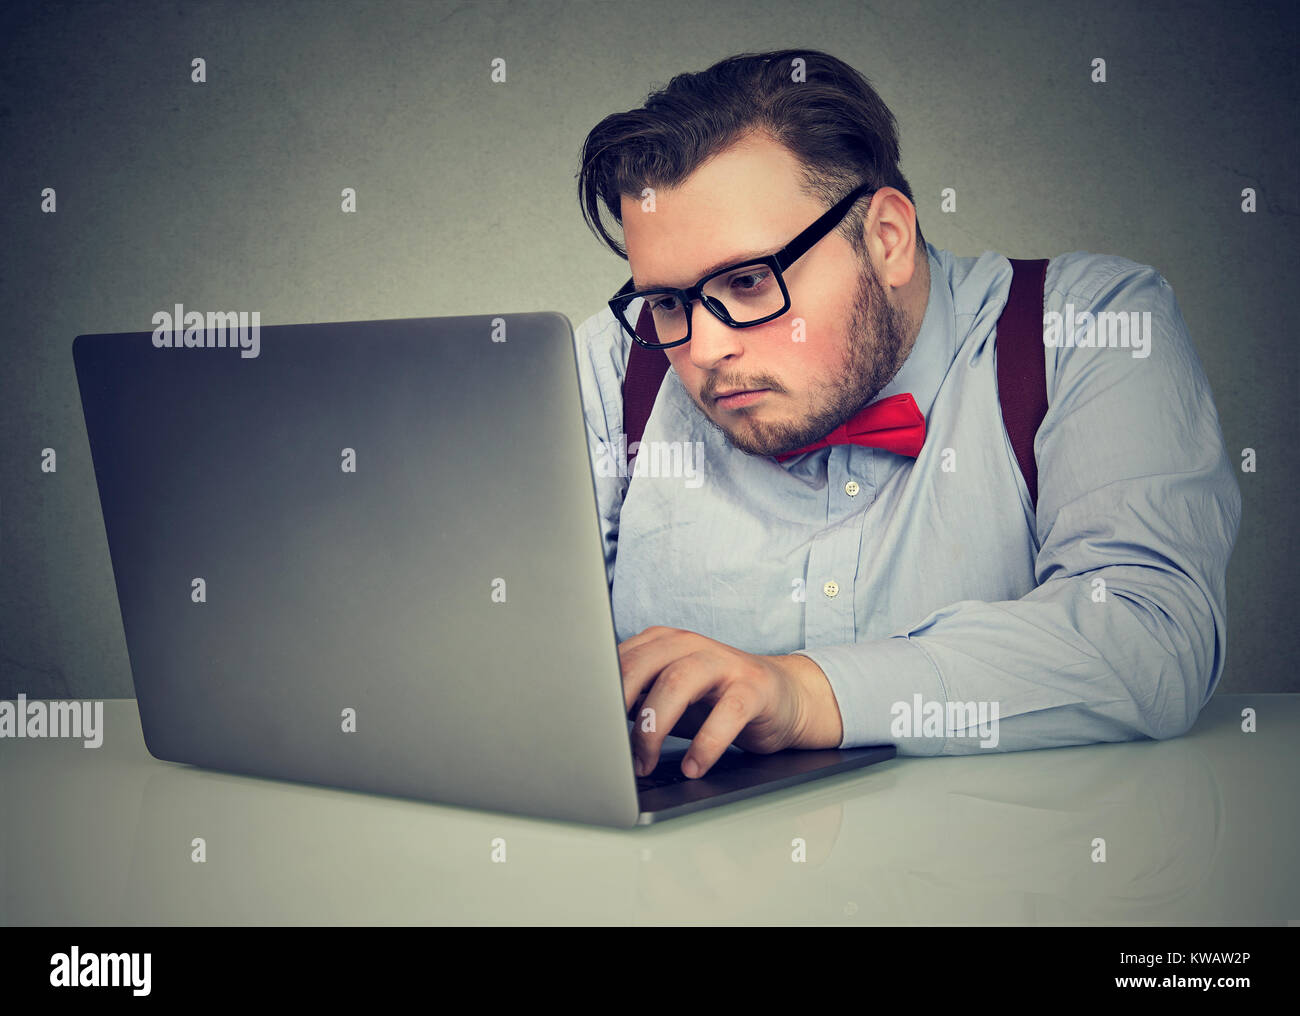 Young serious man in eyeglasses looking at laptop working diligently. Stock Photo